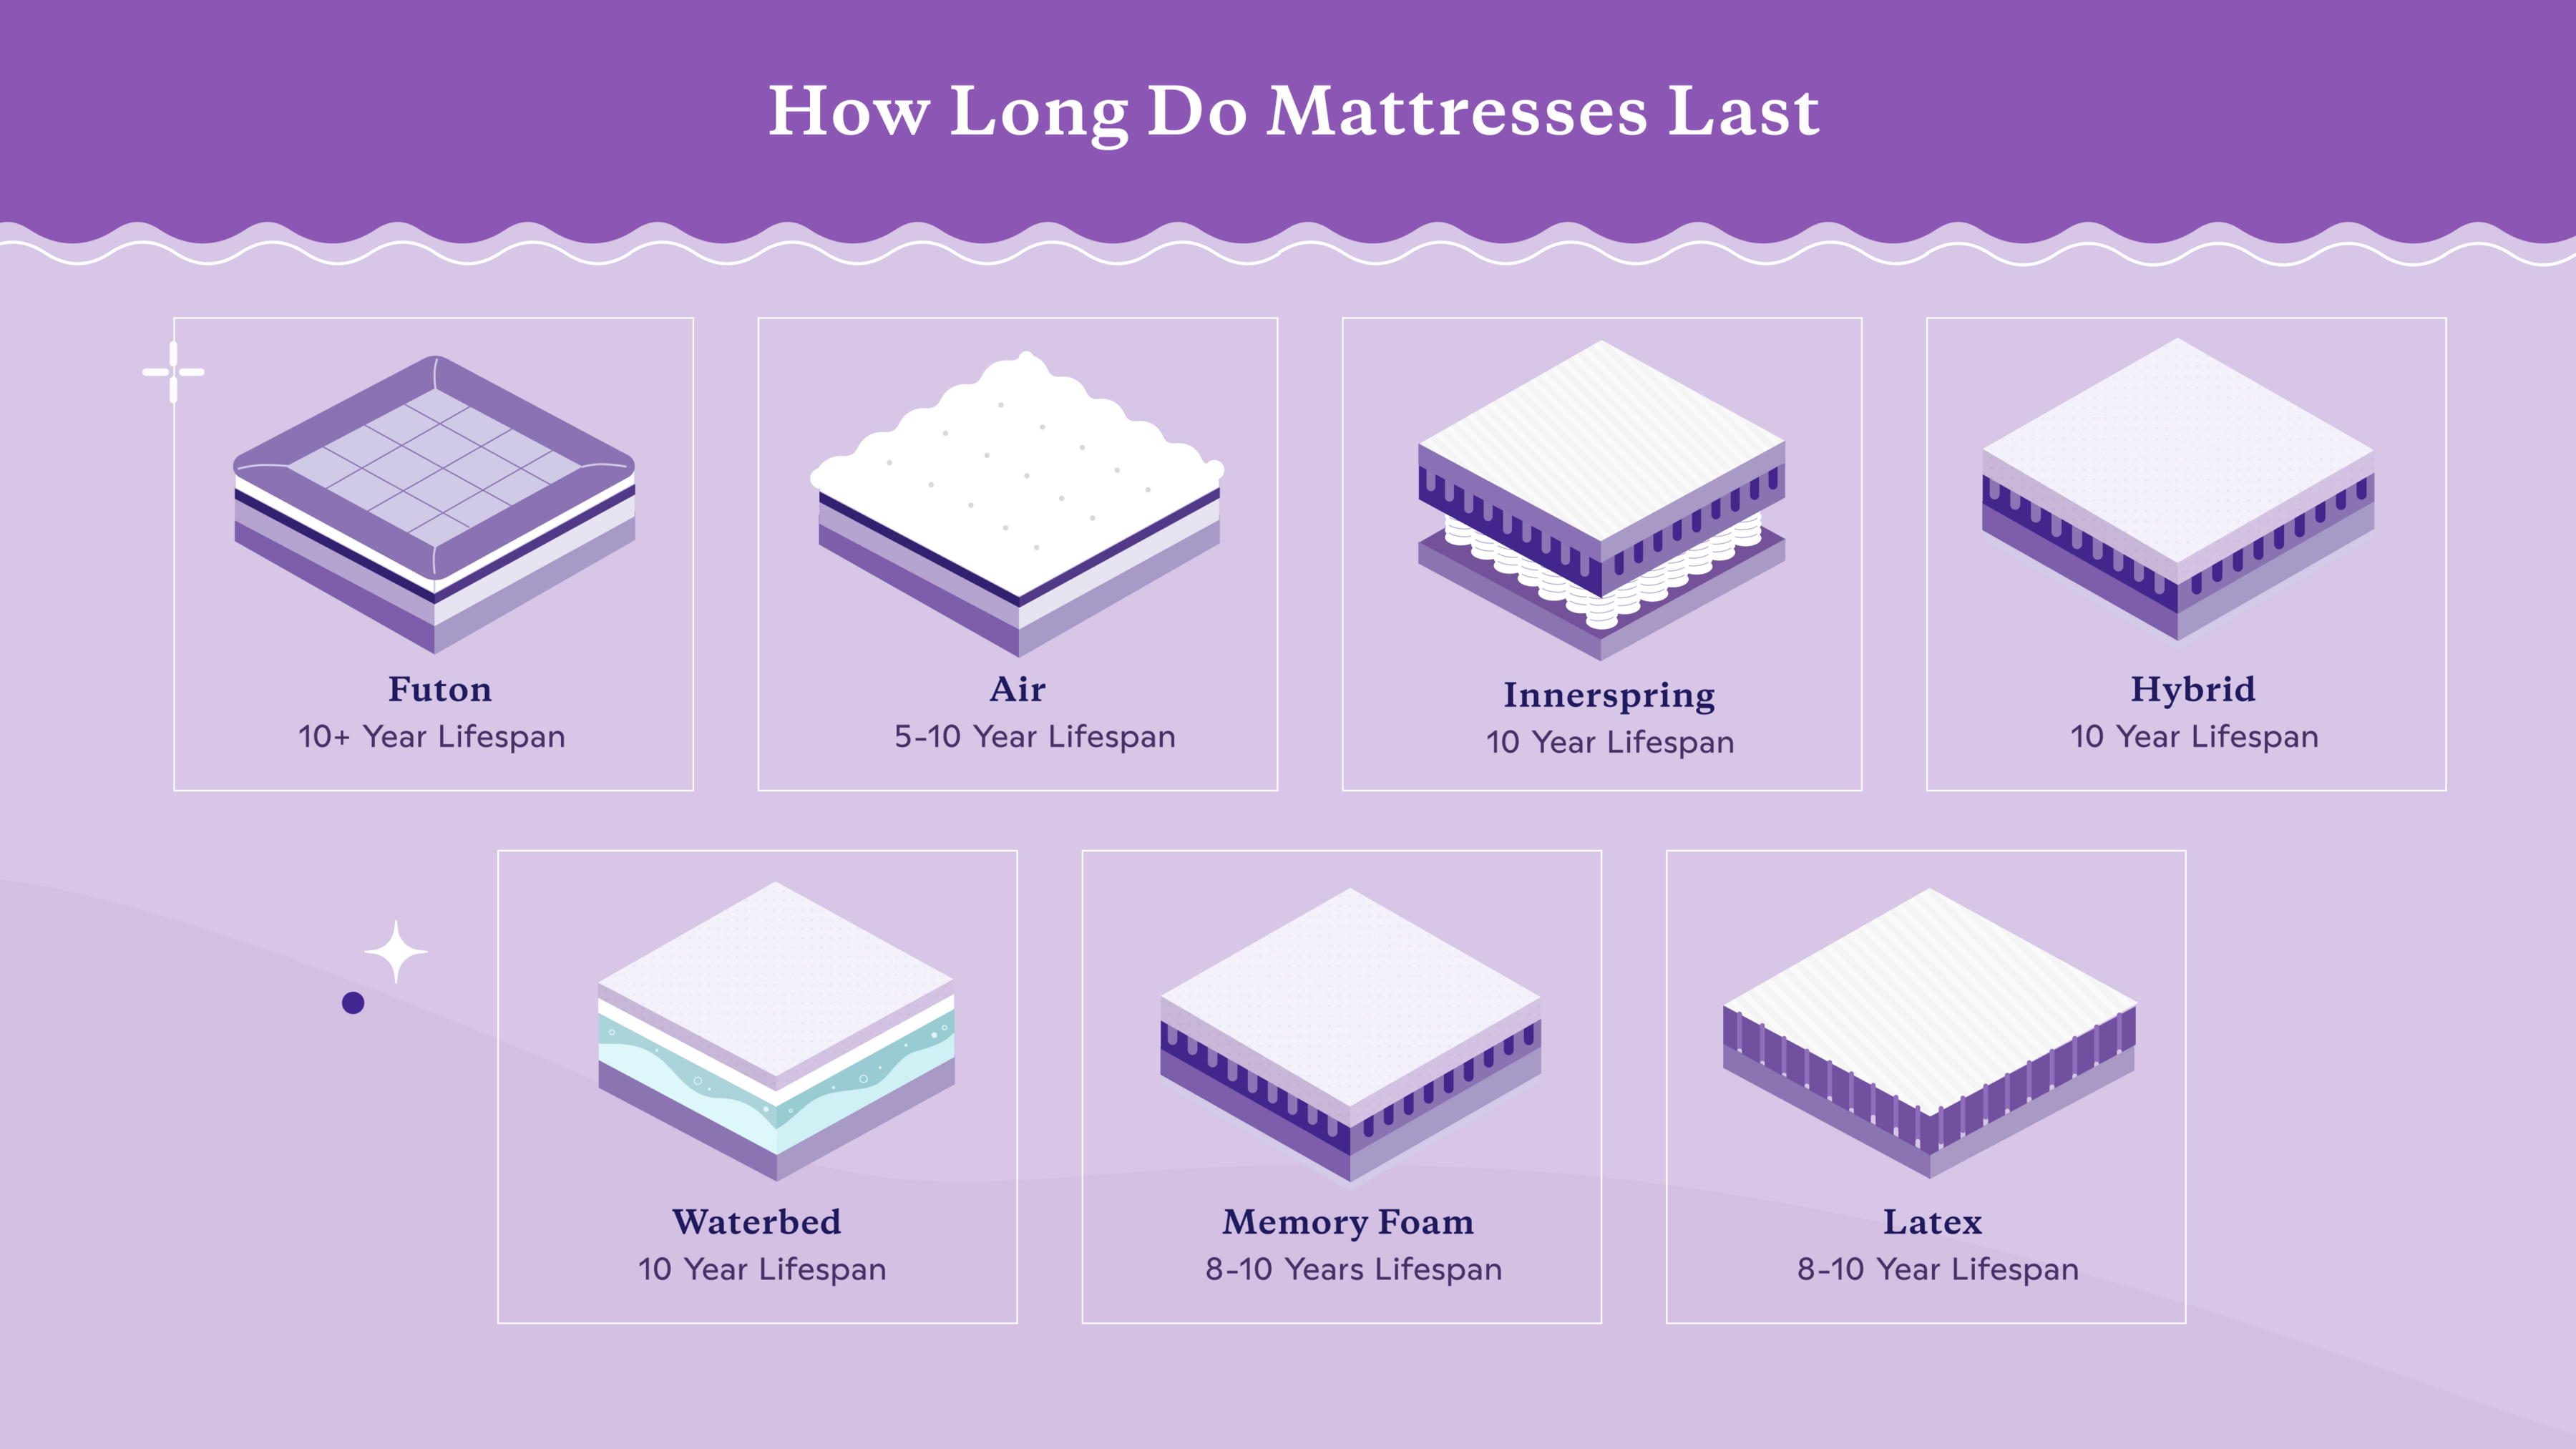 What Type Of Mattress Will Last The Longest?